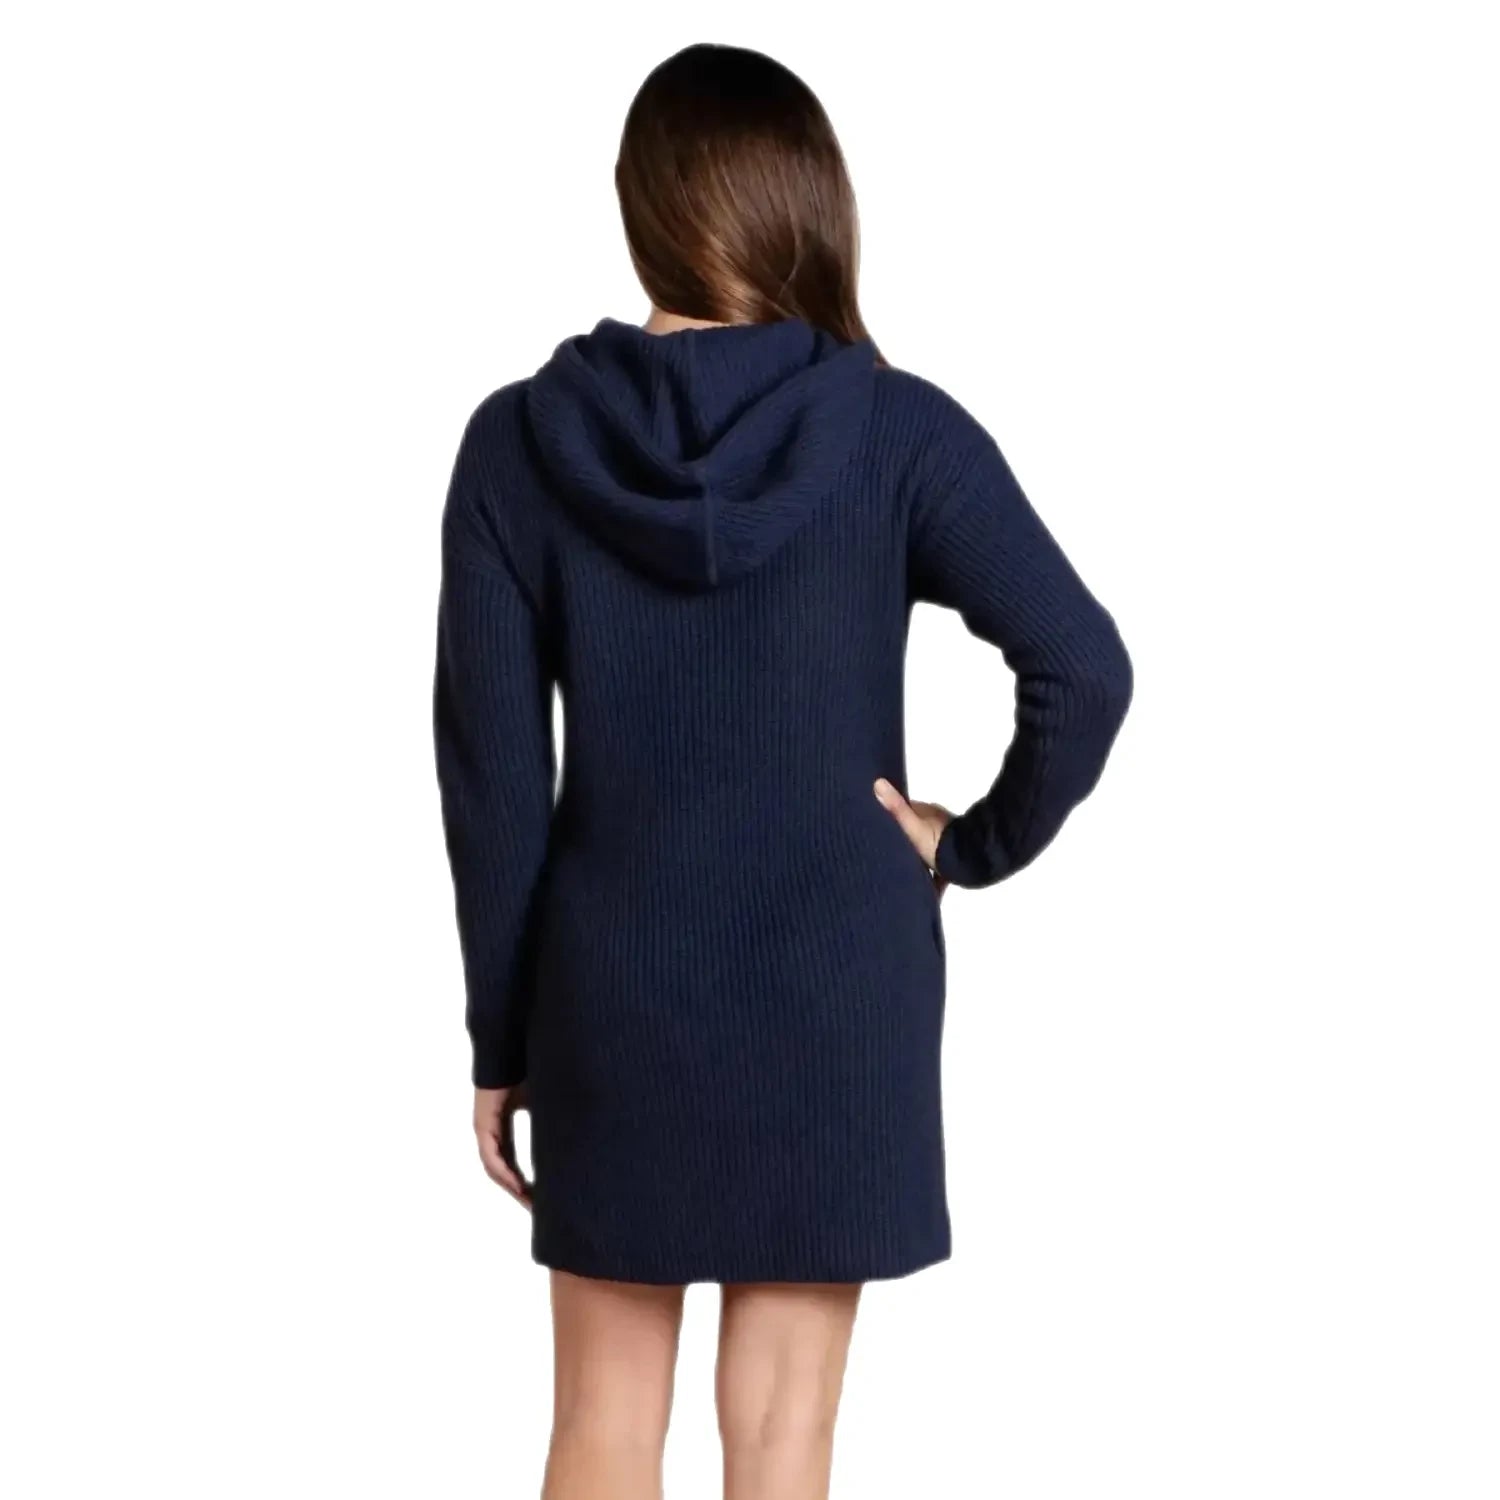 Toad & Co. Women's Whidbey Hooded Sweater Dress shown on model in the Navy color option. Back view.